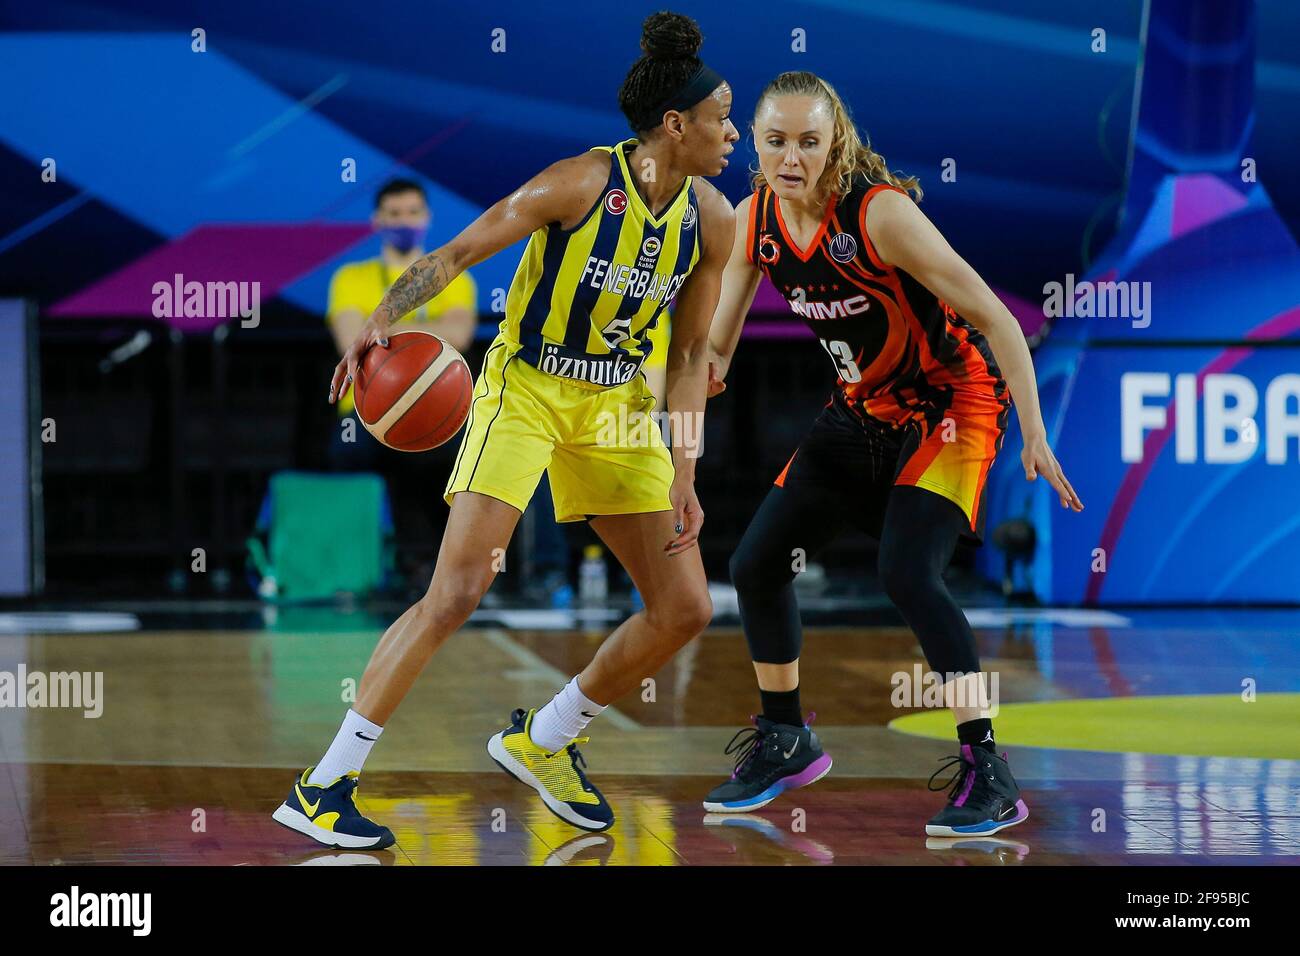 ISTANBUL, Turkey. 16th Apr, 2021: Basketbal: Fenerbahce Oznur Kablo v UMMC Ekaterinburg: Istanboel ISTANBUL, Turkey. 16th Apr, 2021. APRIL 16: Jasmine Thomas of Fenerbahce Oznur Kablo, Elena Beglova of UMMC Ekaterinburg during the Euroleague Women Final Four match between Fenerbahce Oznur Kablo and UMMC Ekaterinburg at Volkswagen Arena on April 16, 2021 in Istanbul, Turkey (Photo by /Orange Pictures) Credit: Orange Pics BV/Alamy Live News Stock Photo